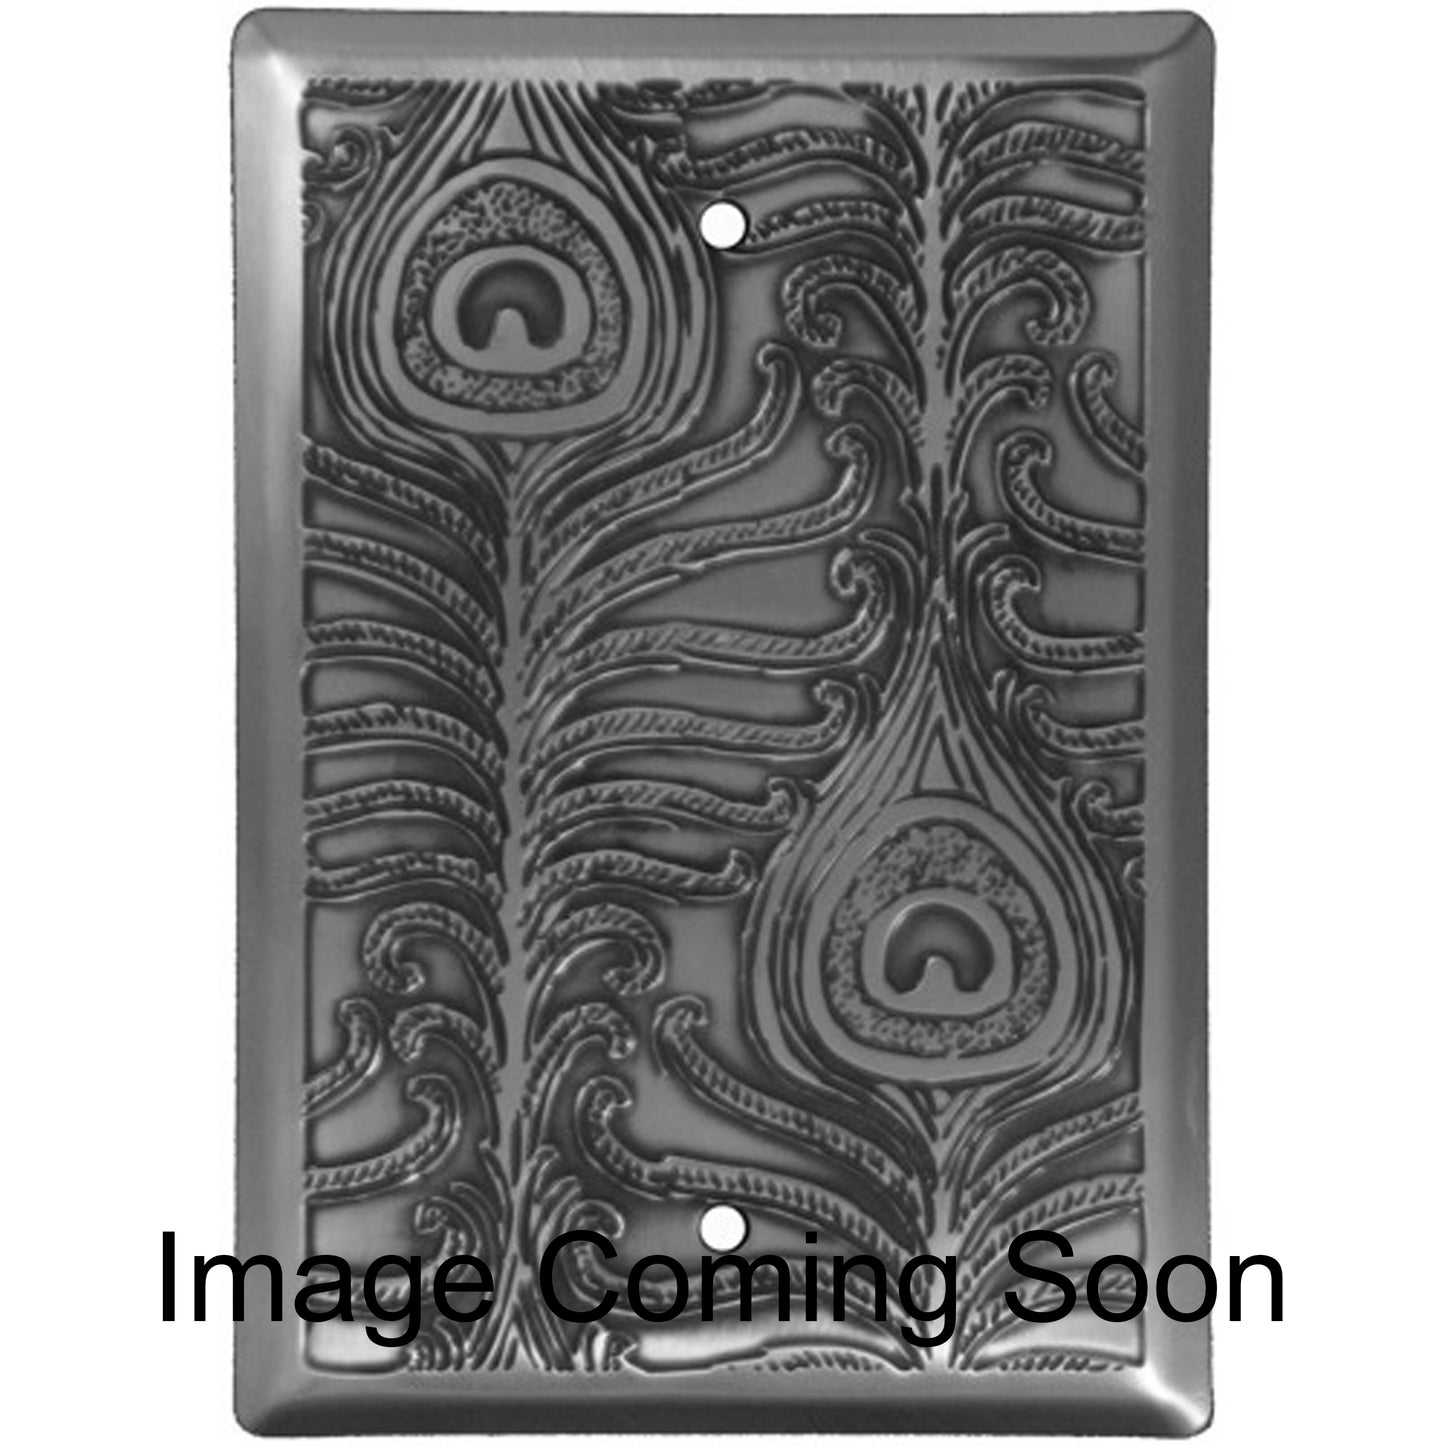 Peacock Stainless Steel BlankSwitchplate